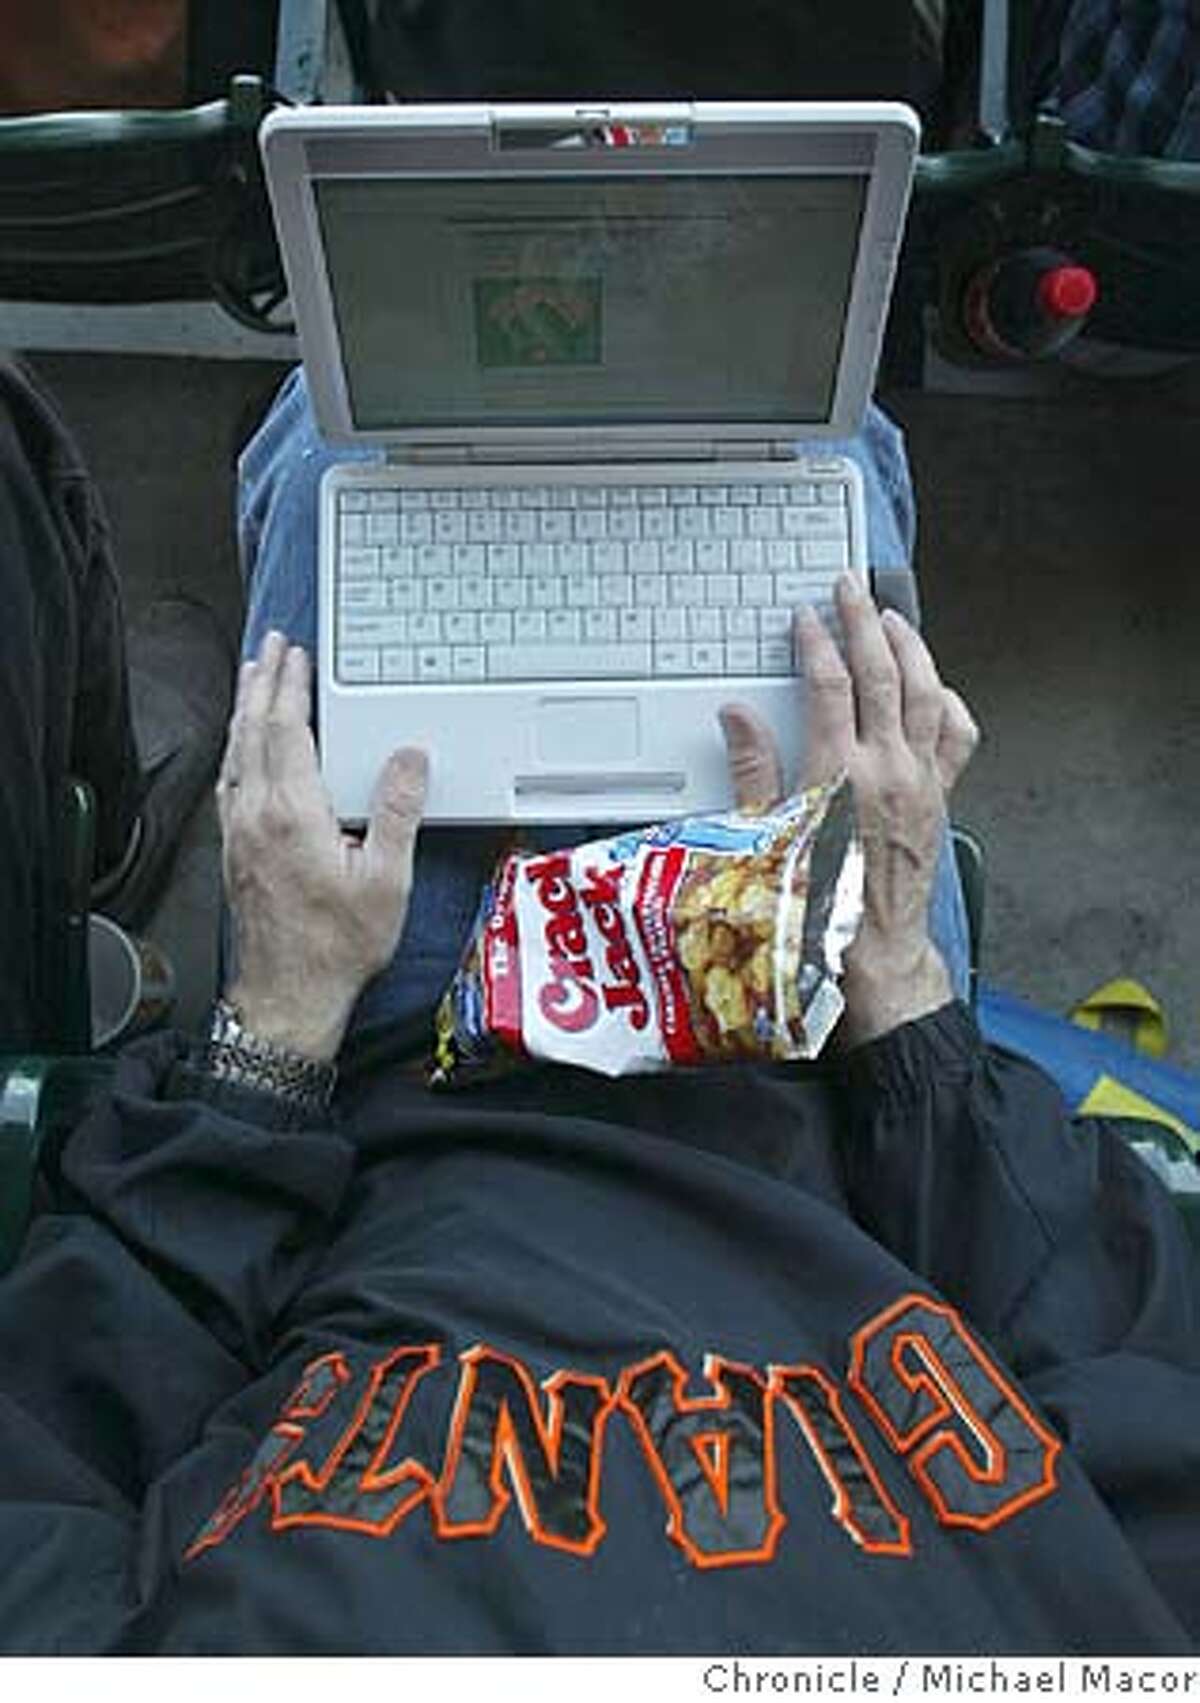 Richard Hilleman of San Mateo takes his mini-laptop to the game to follow along with the statistics and check other scores of other games. WiFi Internet access now available to fans who take in a Giants game at SBC Park here in San Francisco. event on 4/22/04 in San Francisco Michael Macor / San Francisco Chronicle